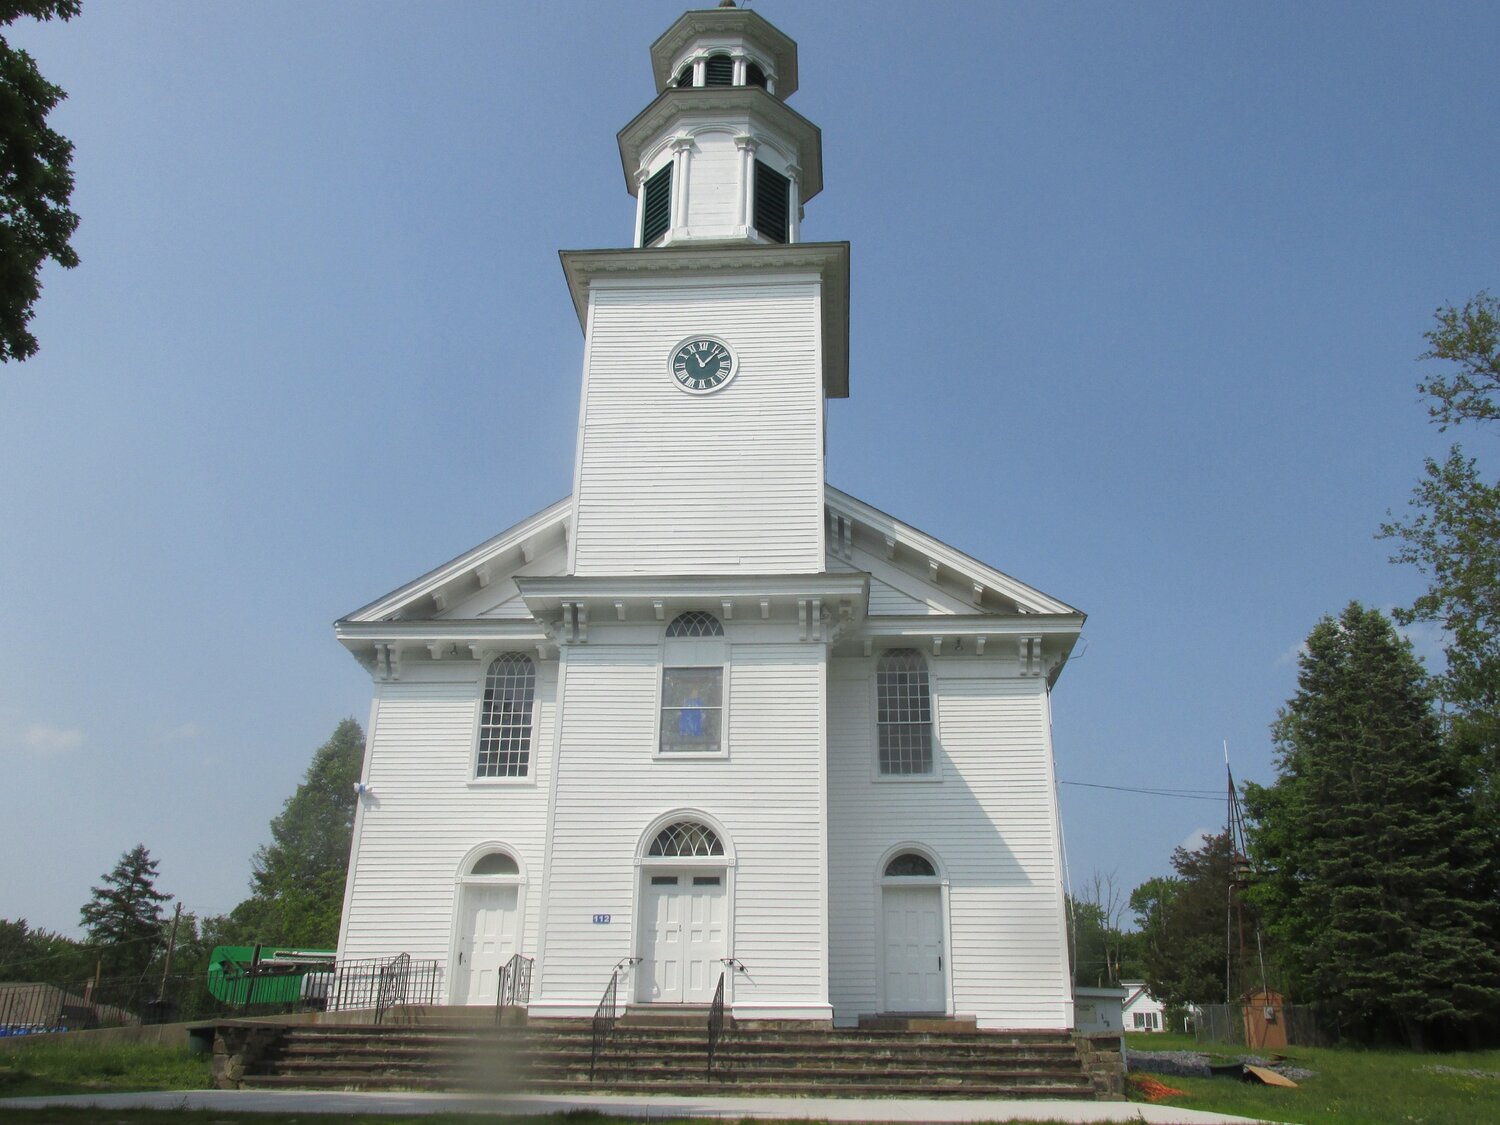 The Bloomingburg Reformed Protestant Dutch Church has a fresh coat of paint, and exterior repairs have been completed.